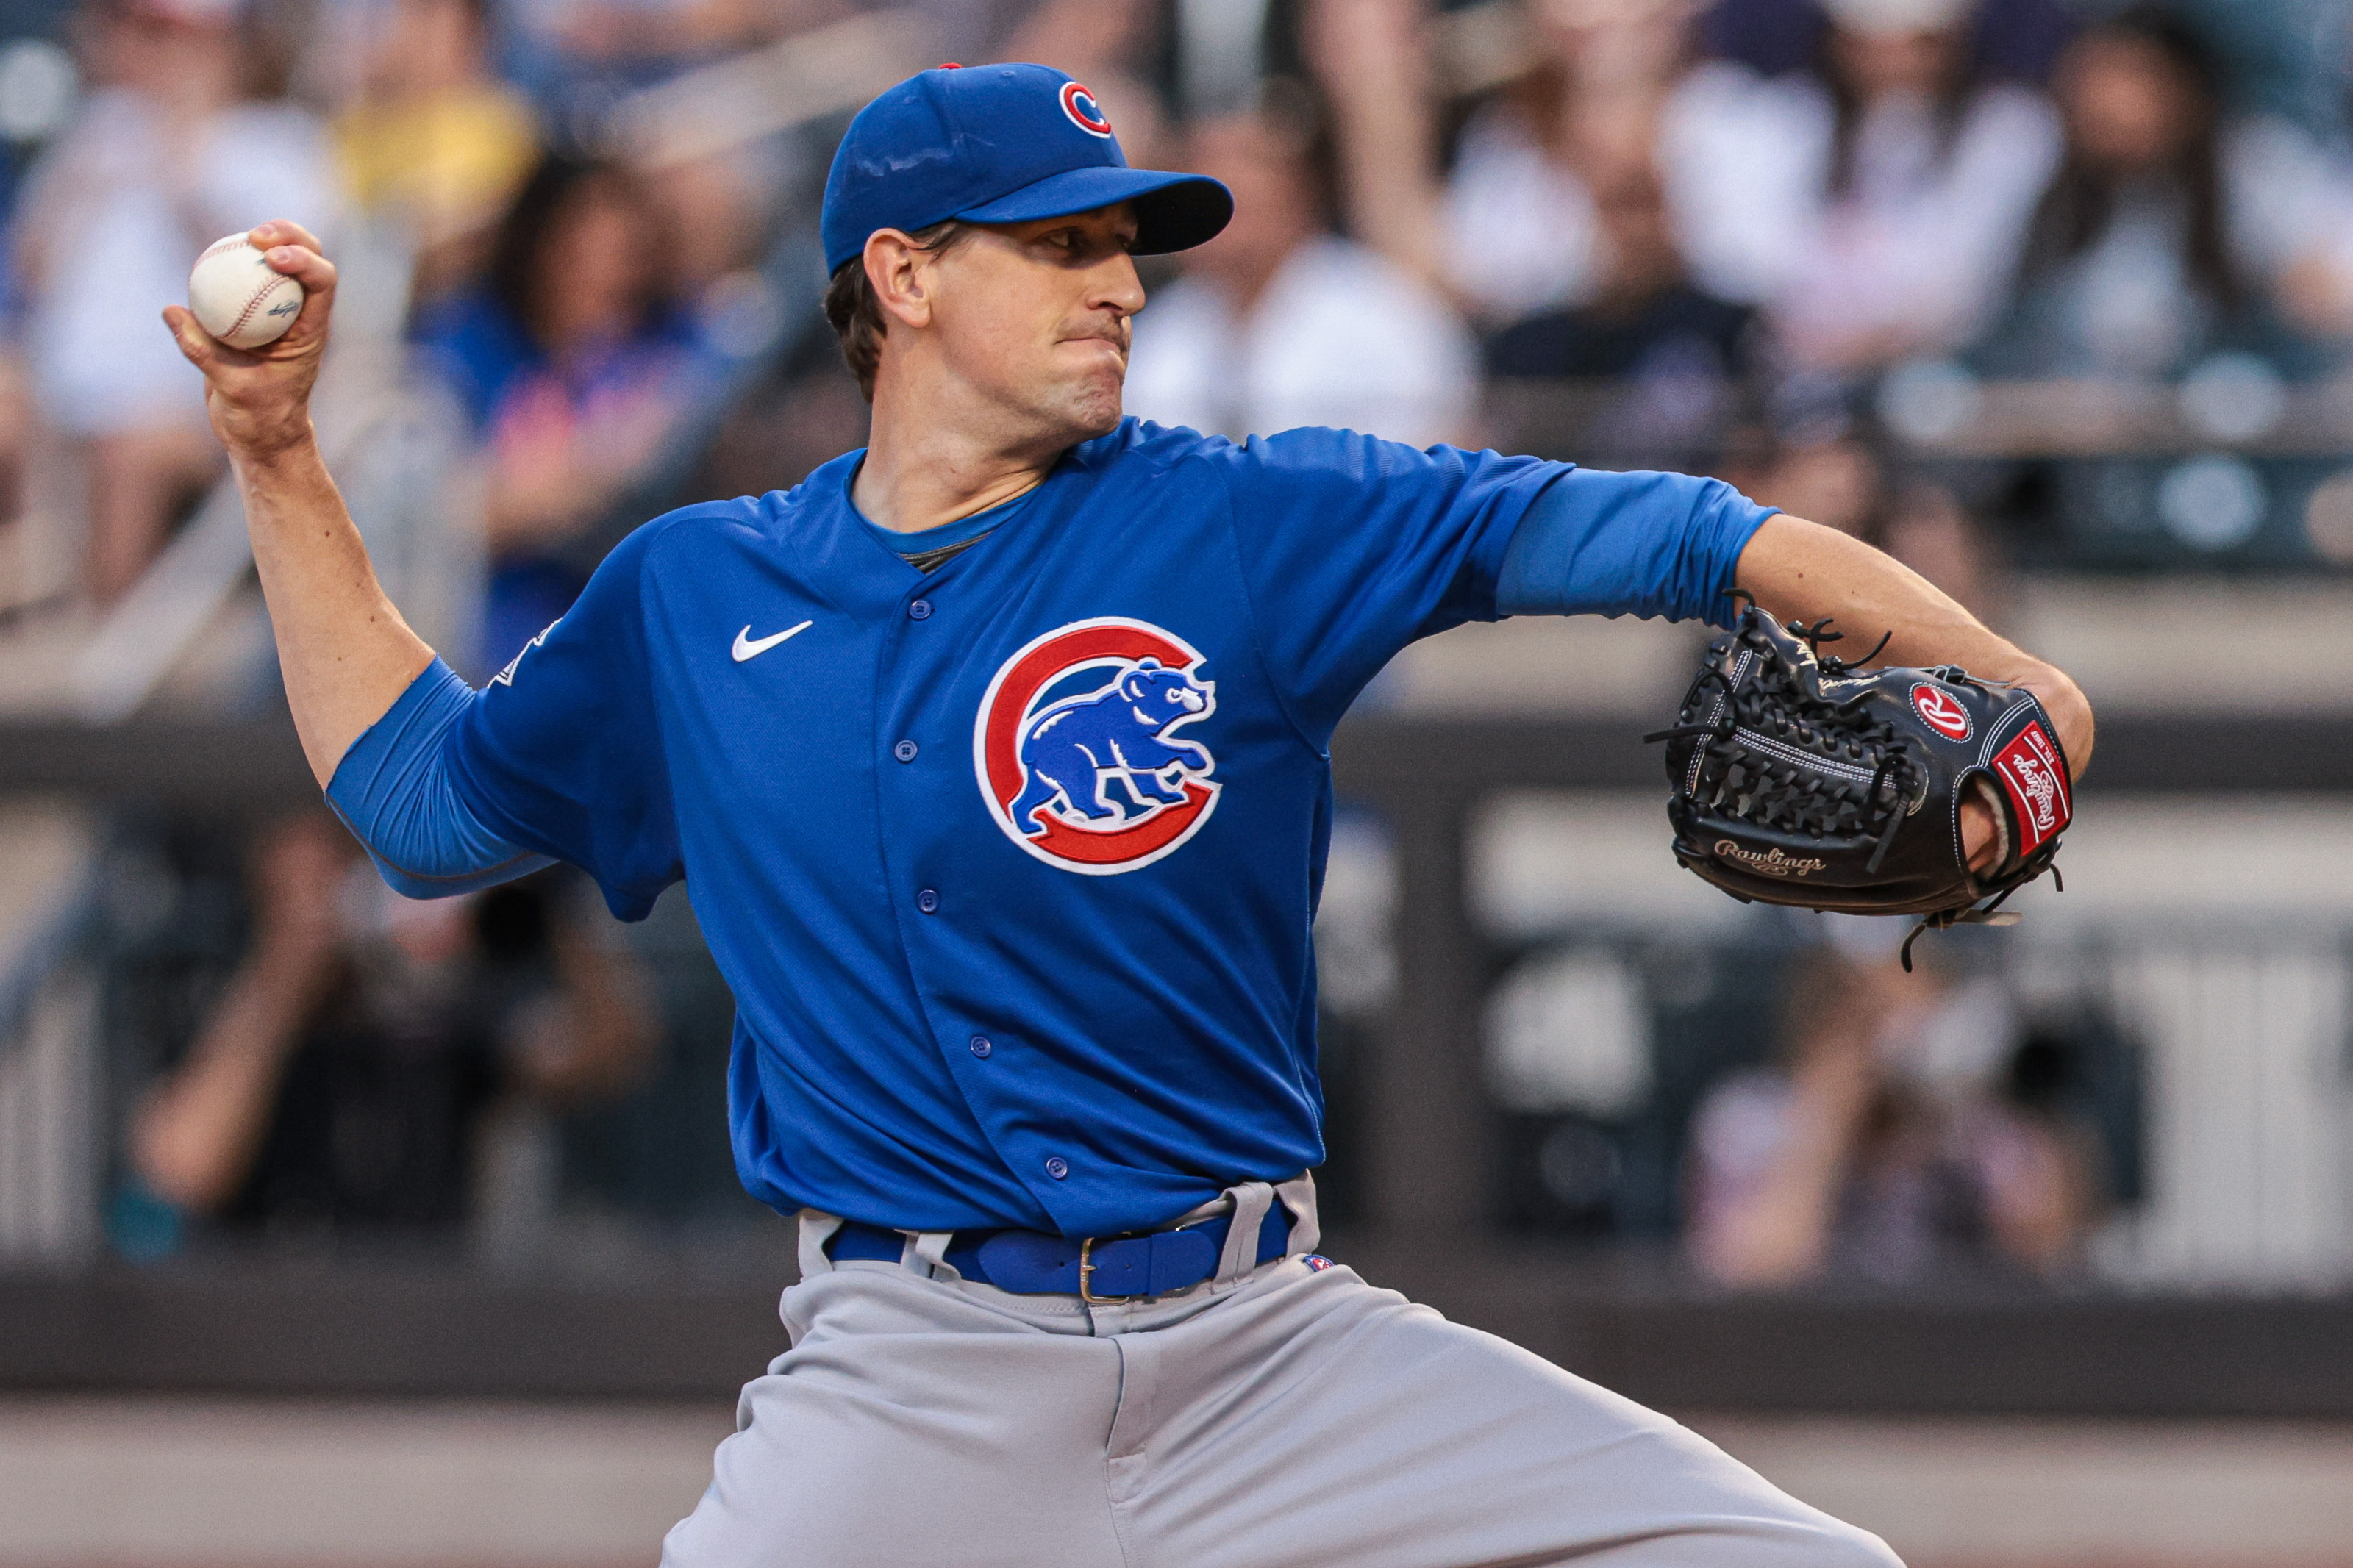 What's next for Kyle Hendricks and the Cubs? - CHGO